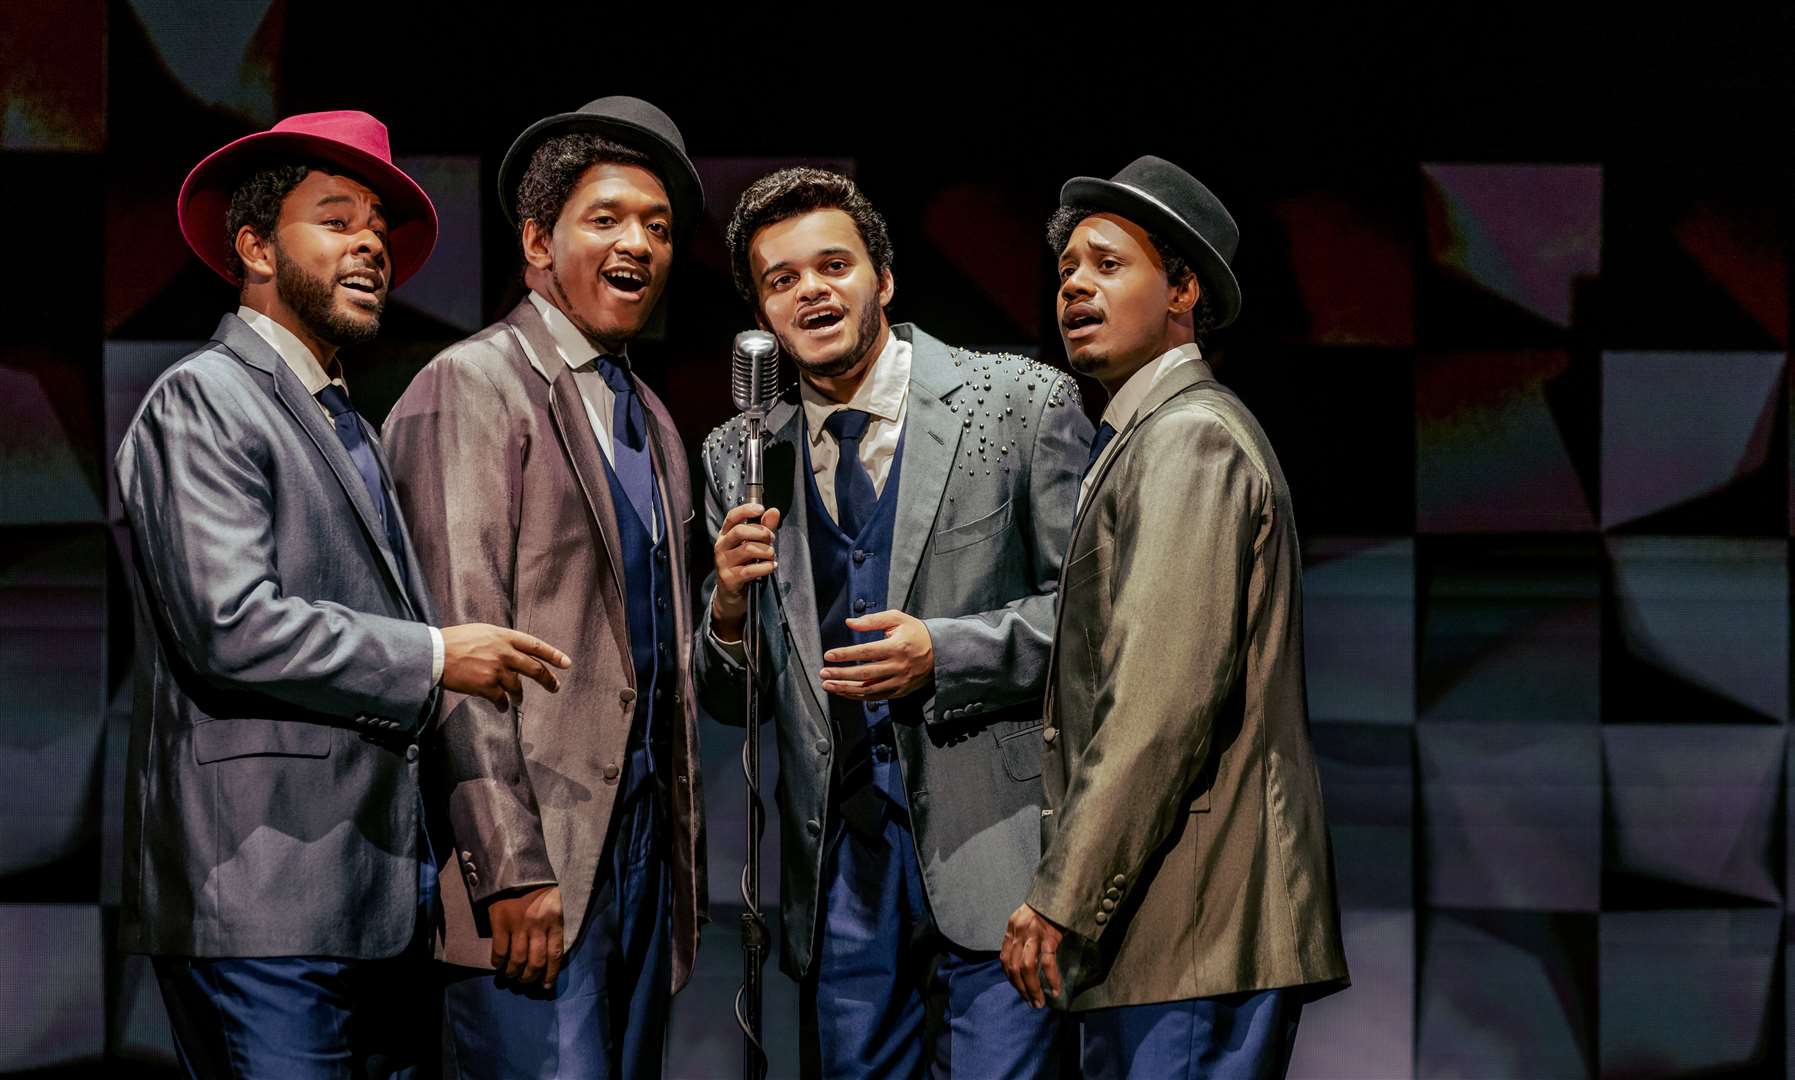 1950s musical The Drifters Girl is coming to Canterbury. Picture: The Other Richard